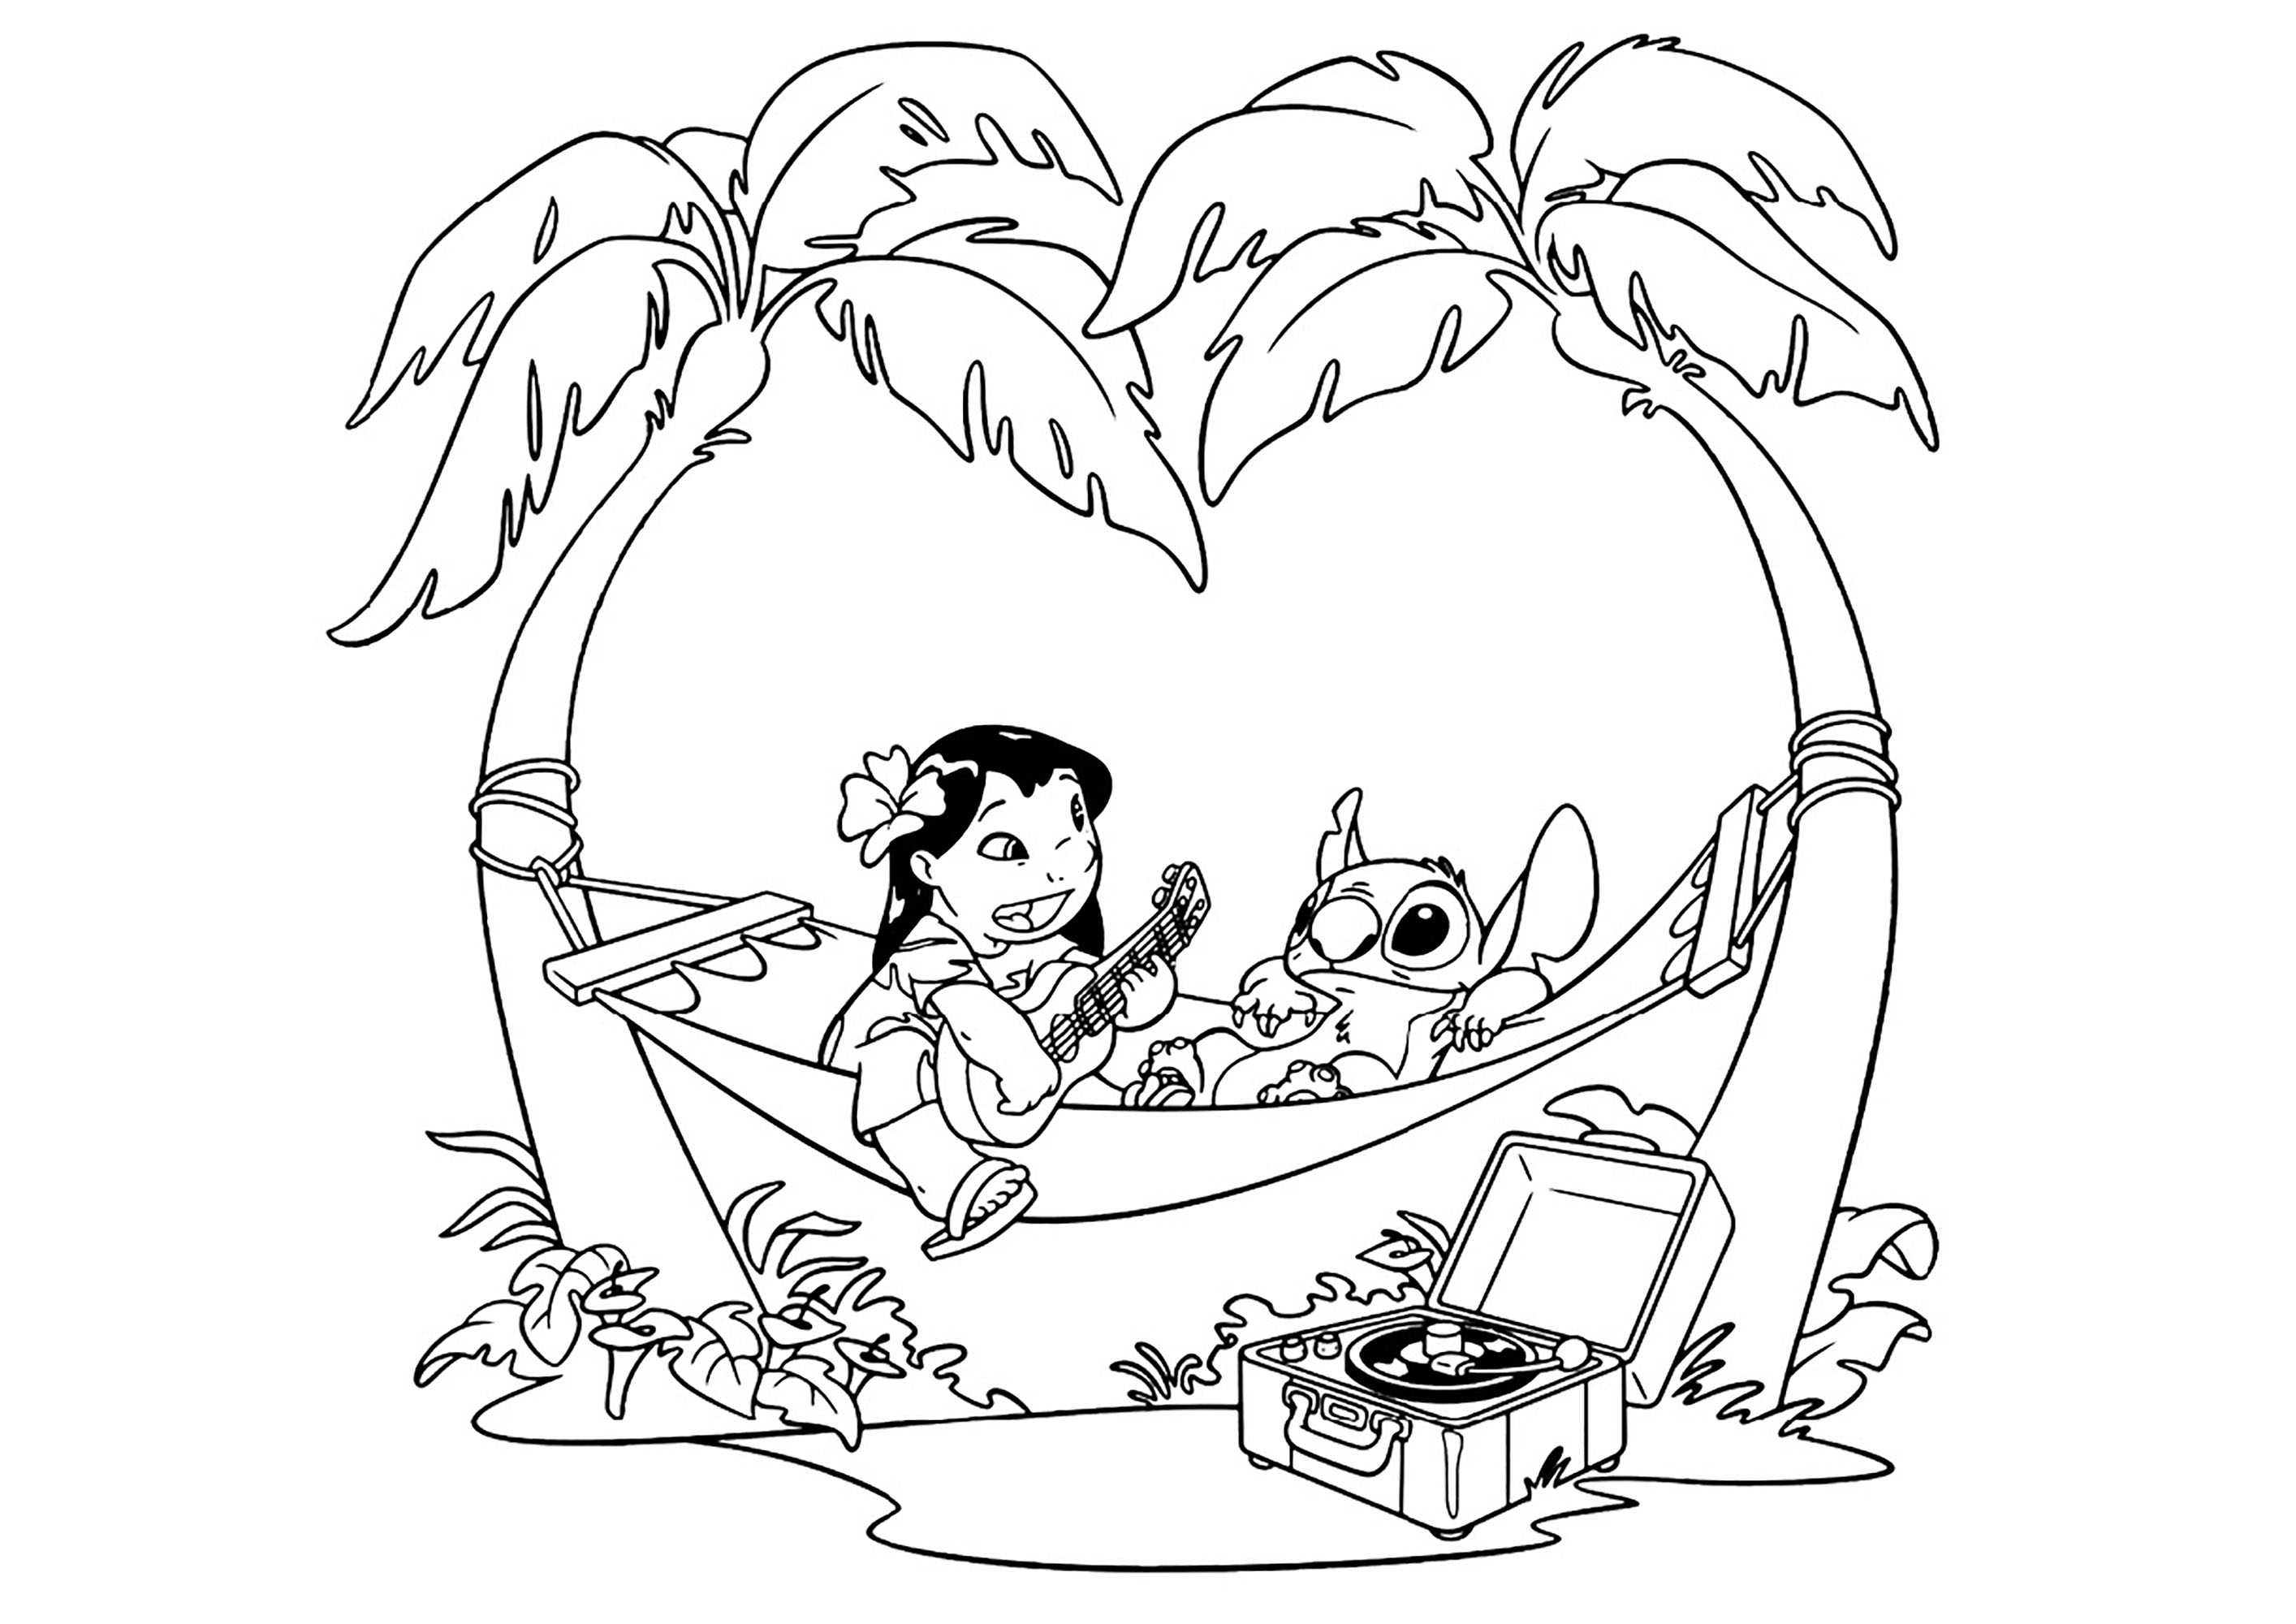 lilo-and-stich-coloring-for-children-lilo-and-stich-kids-coloring-pages